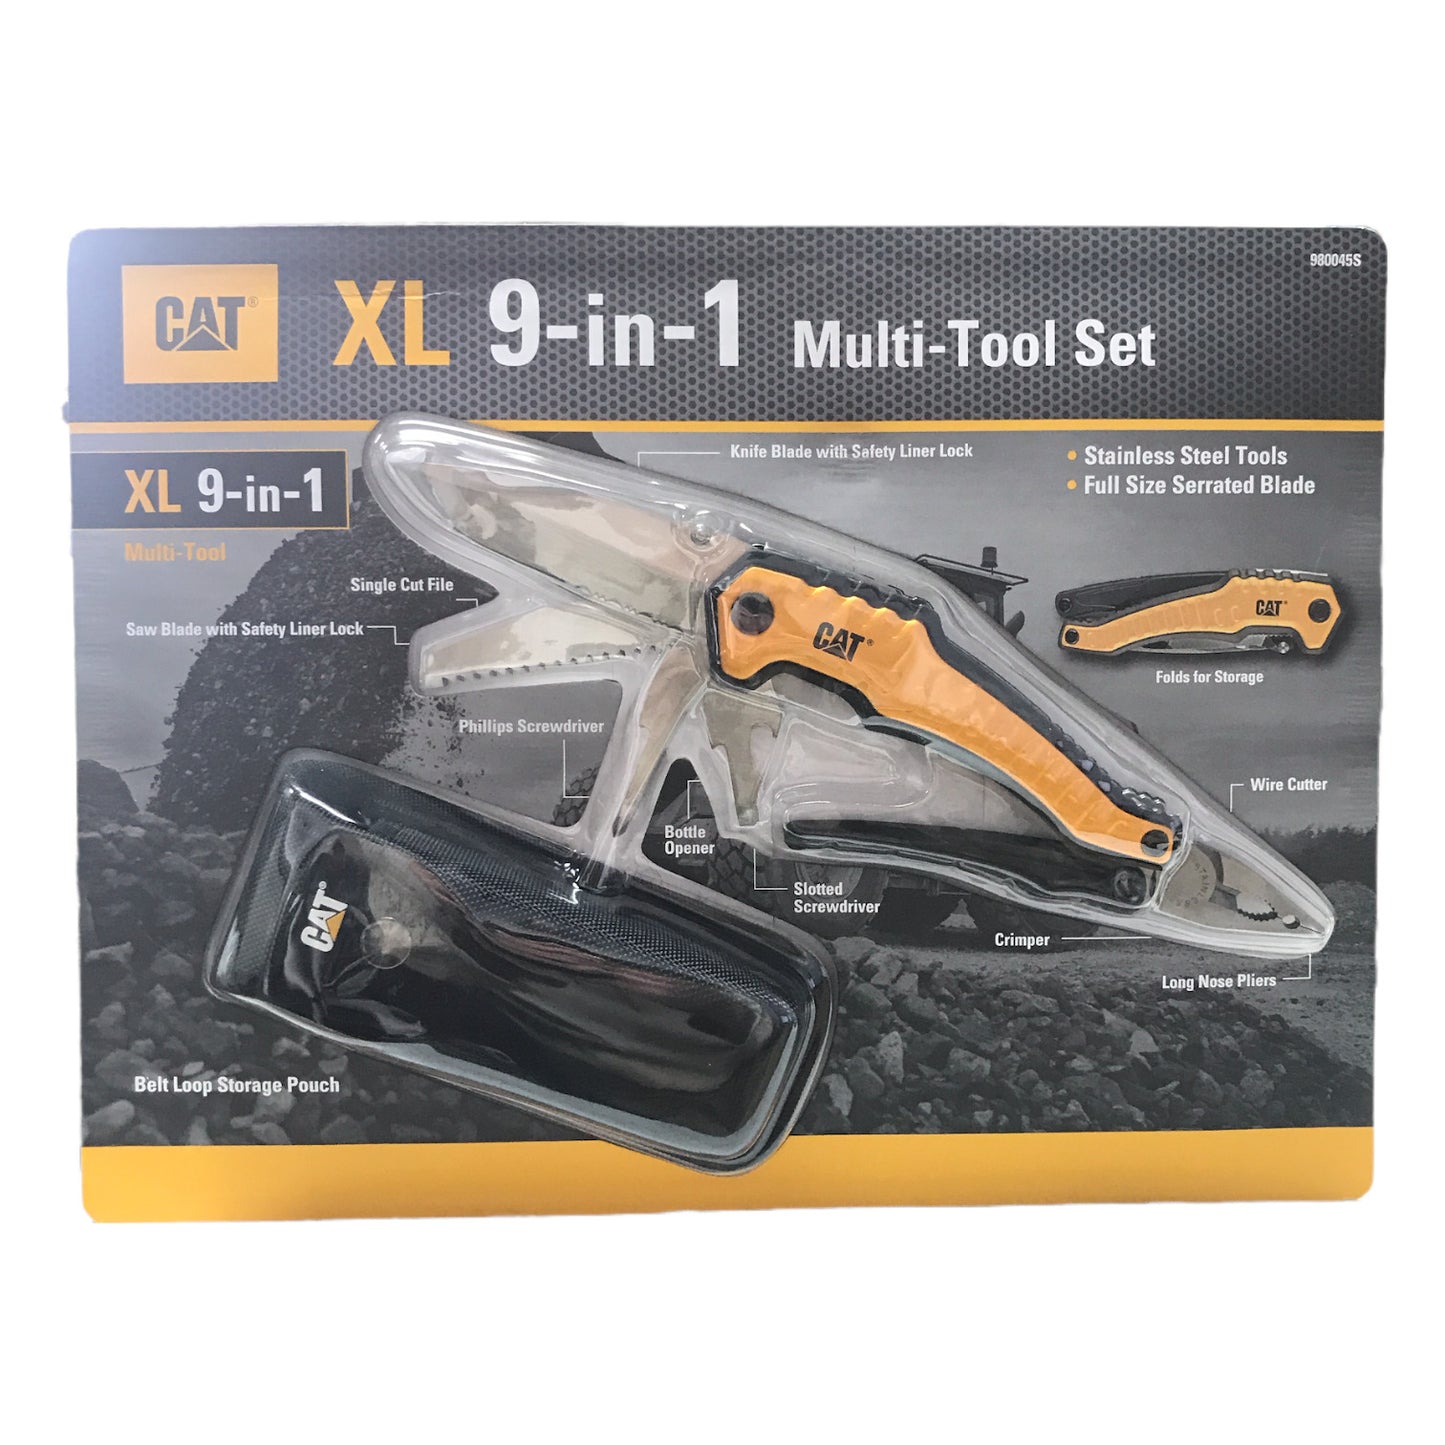 CAT XL 9-in-1 Multi-Tool, Full Size Knife Blade and Pliers, Carrying Case